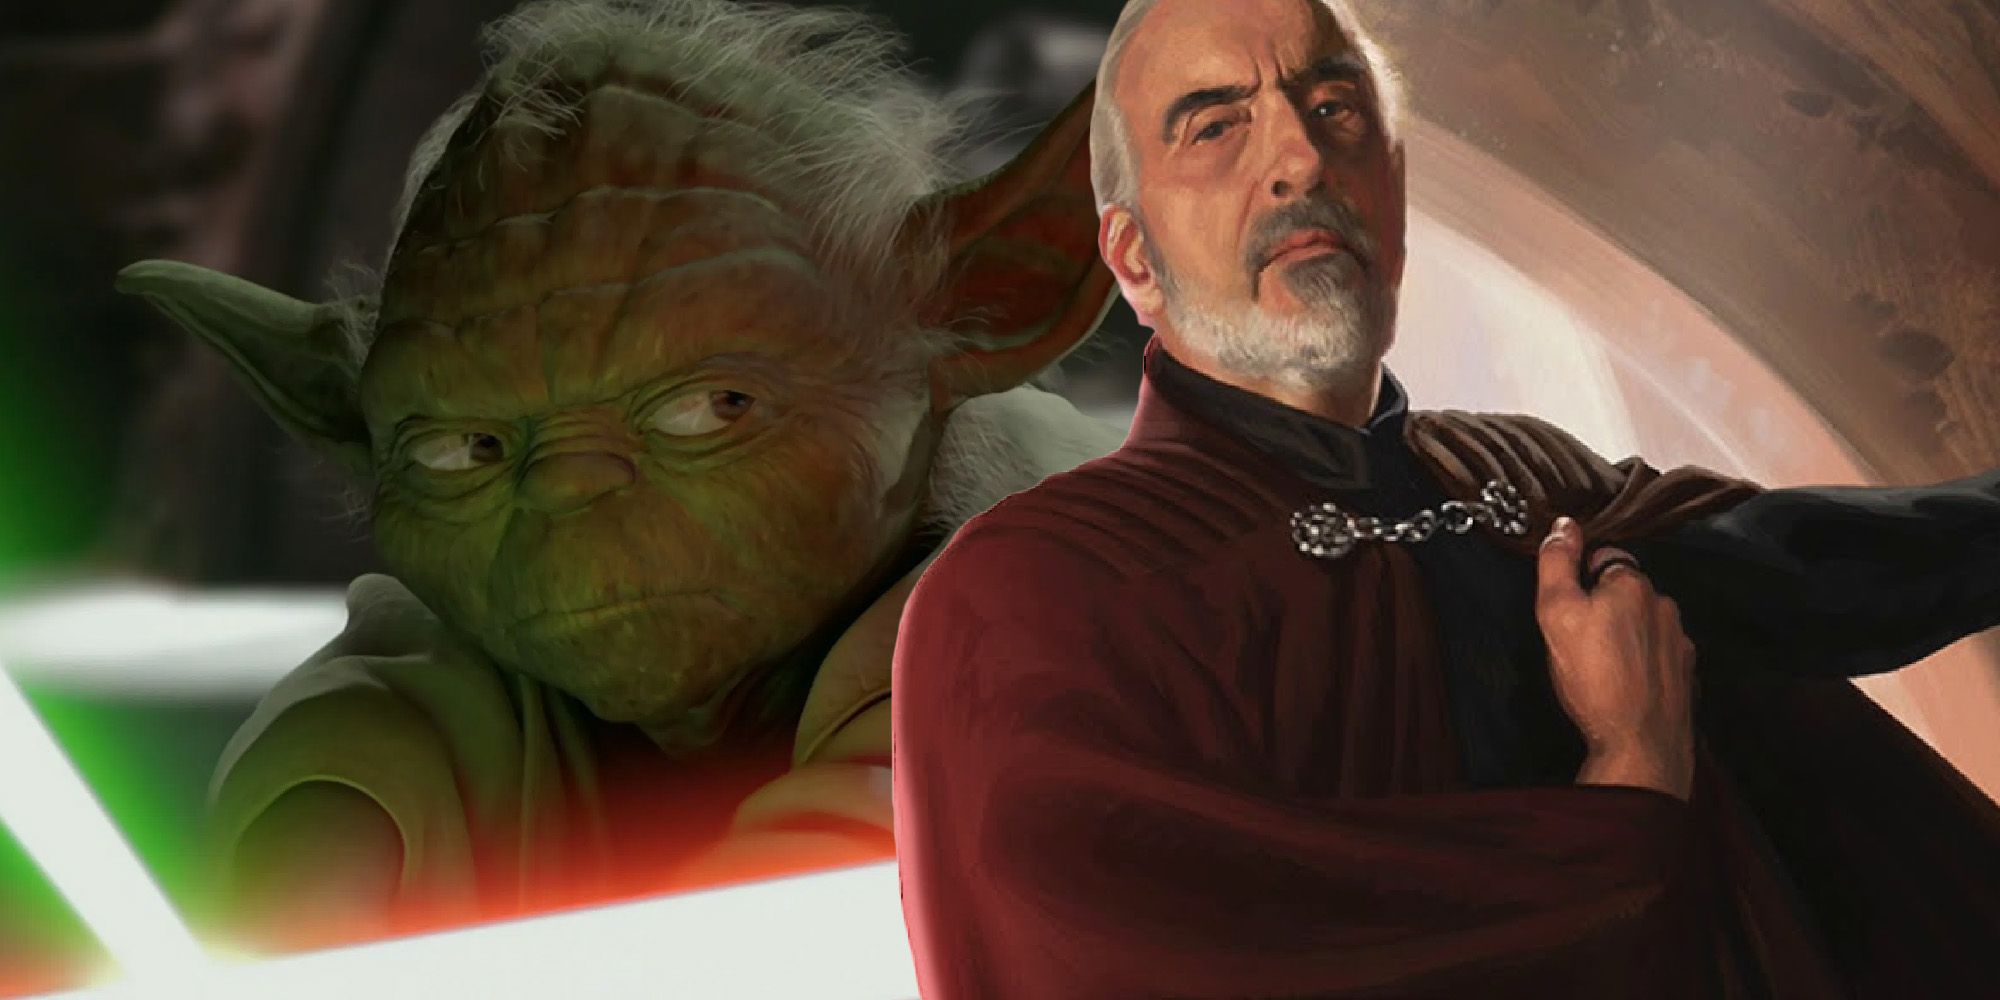 Count-Dooku-Yoda-Star-Wars-Attack-of-the-Clones